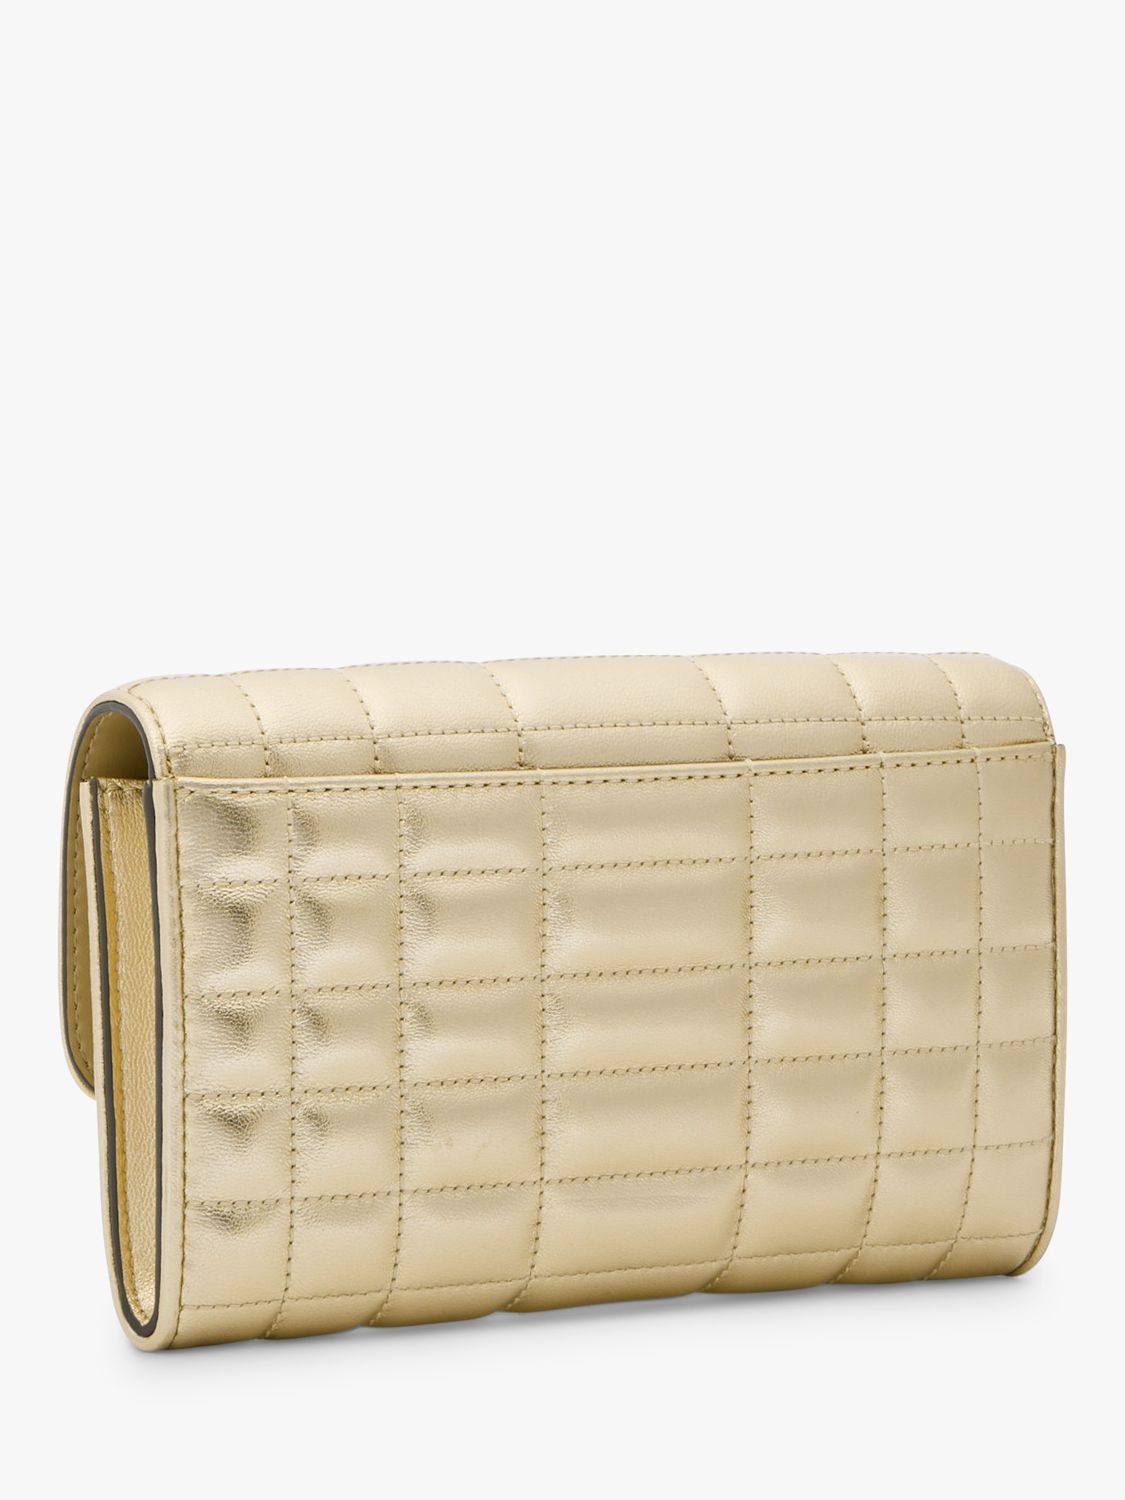 Buy Michael Kors Tribeca Quilted Leather Wallet on a Chain Online at johnlewis.com